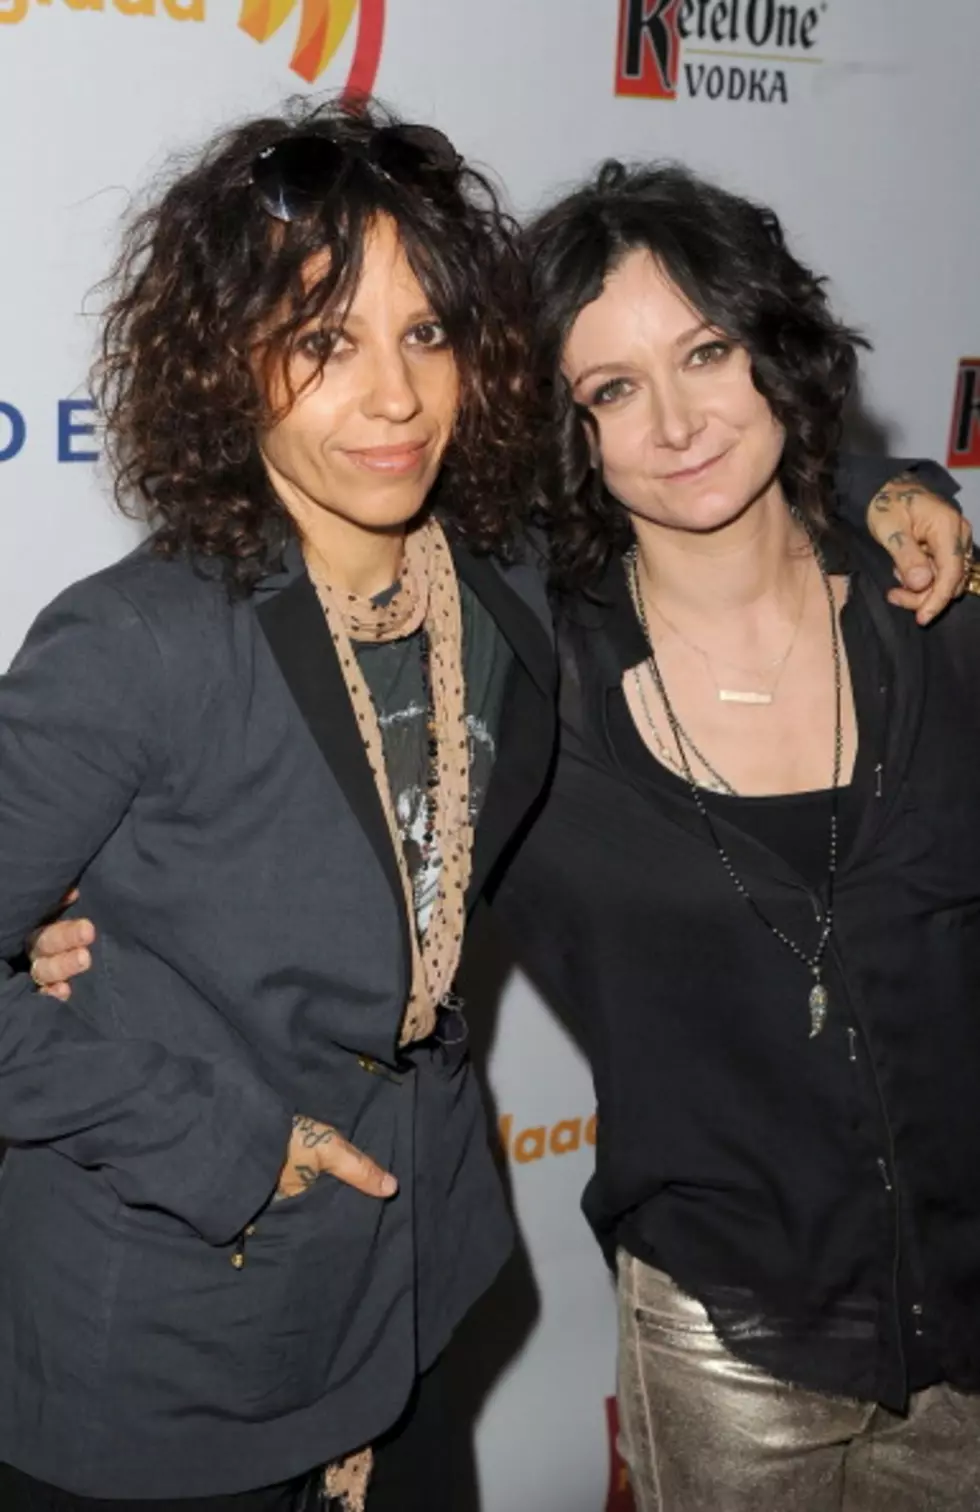 Record Producer Linda Perry Gets Engaged